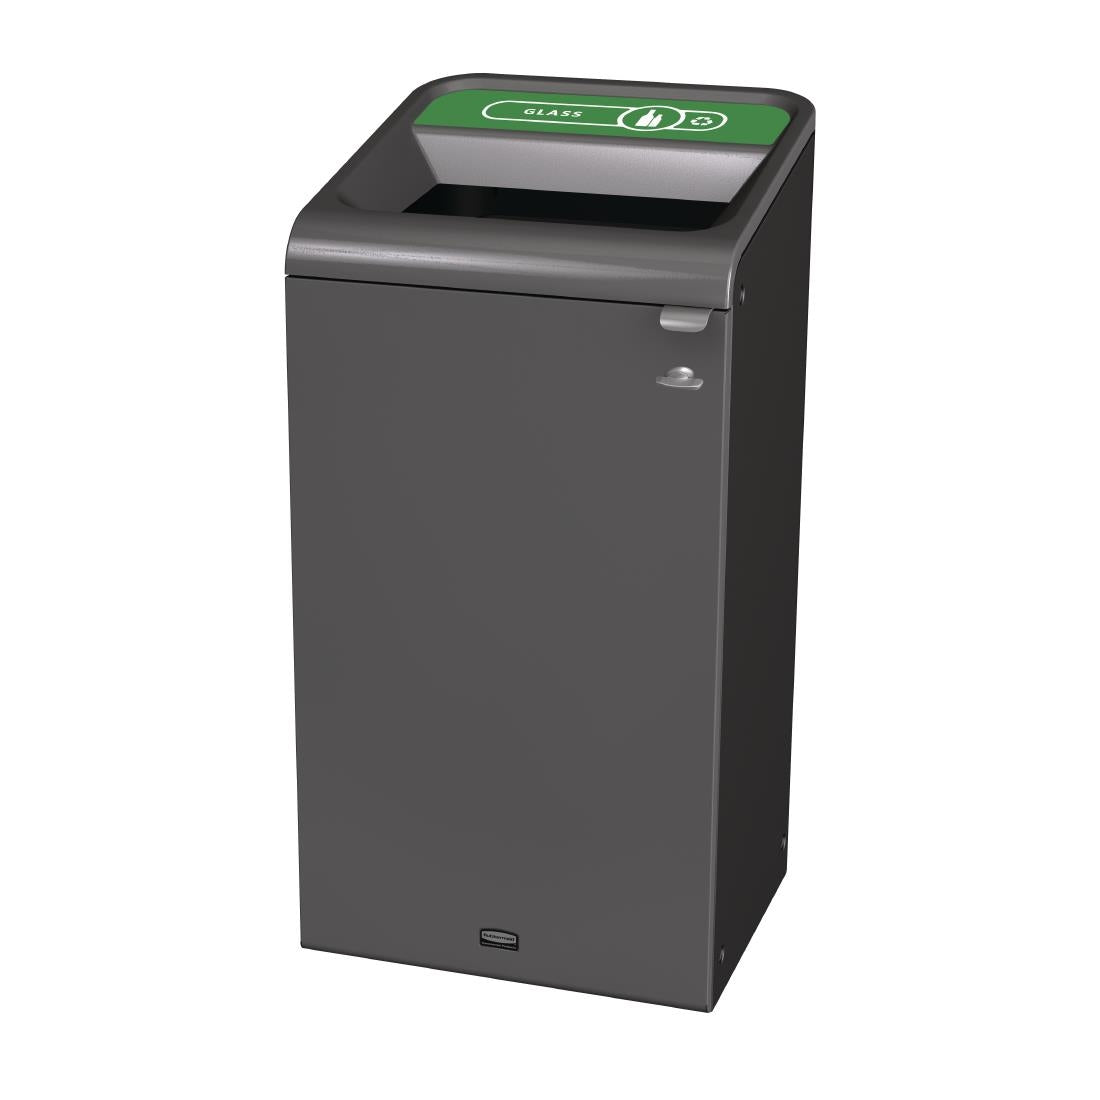 CX967 Rubbermaid Configure Recycling Bin with Glass Recycling Label Green 87Ltr JD Catering Equipment Solutions Ltd